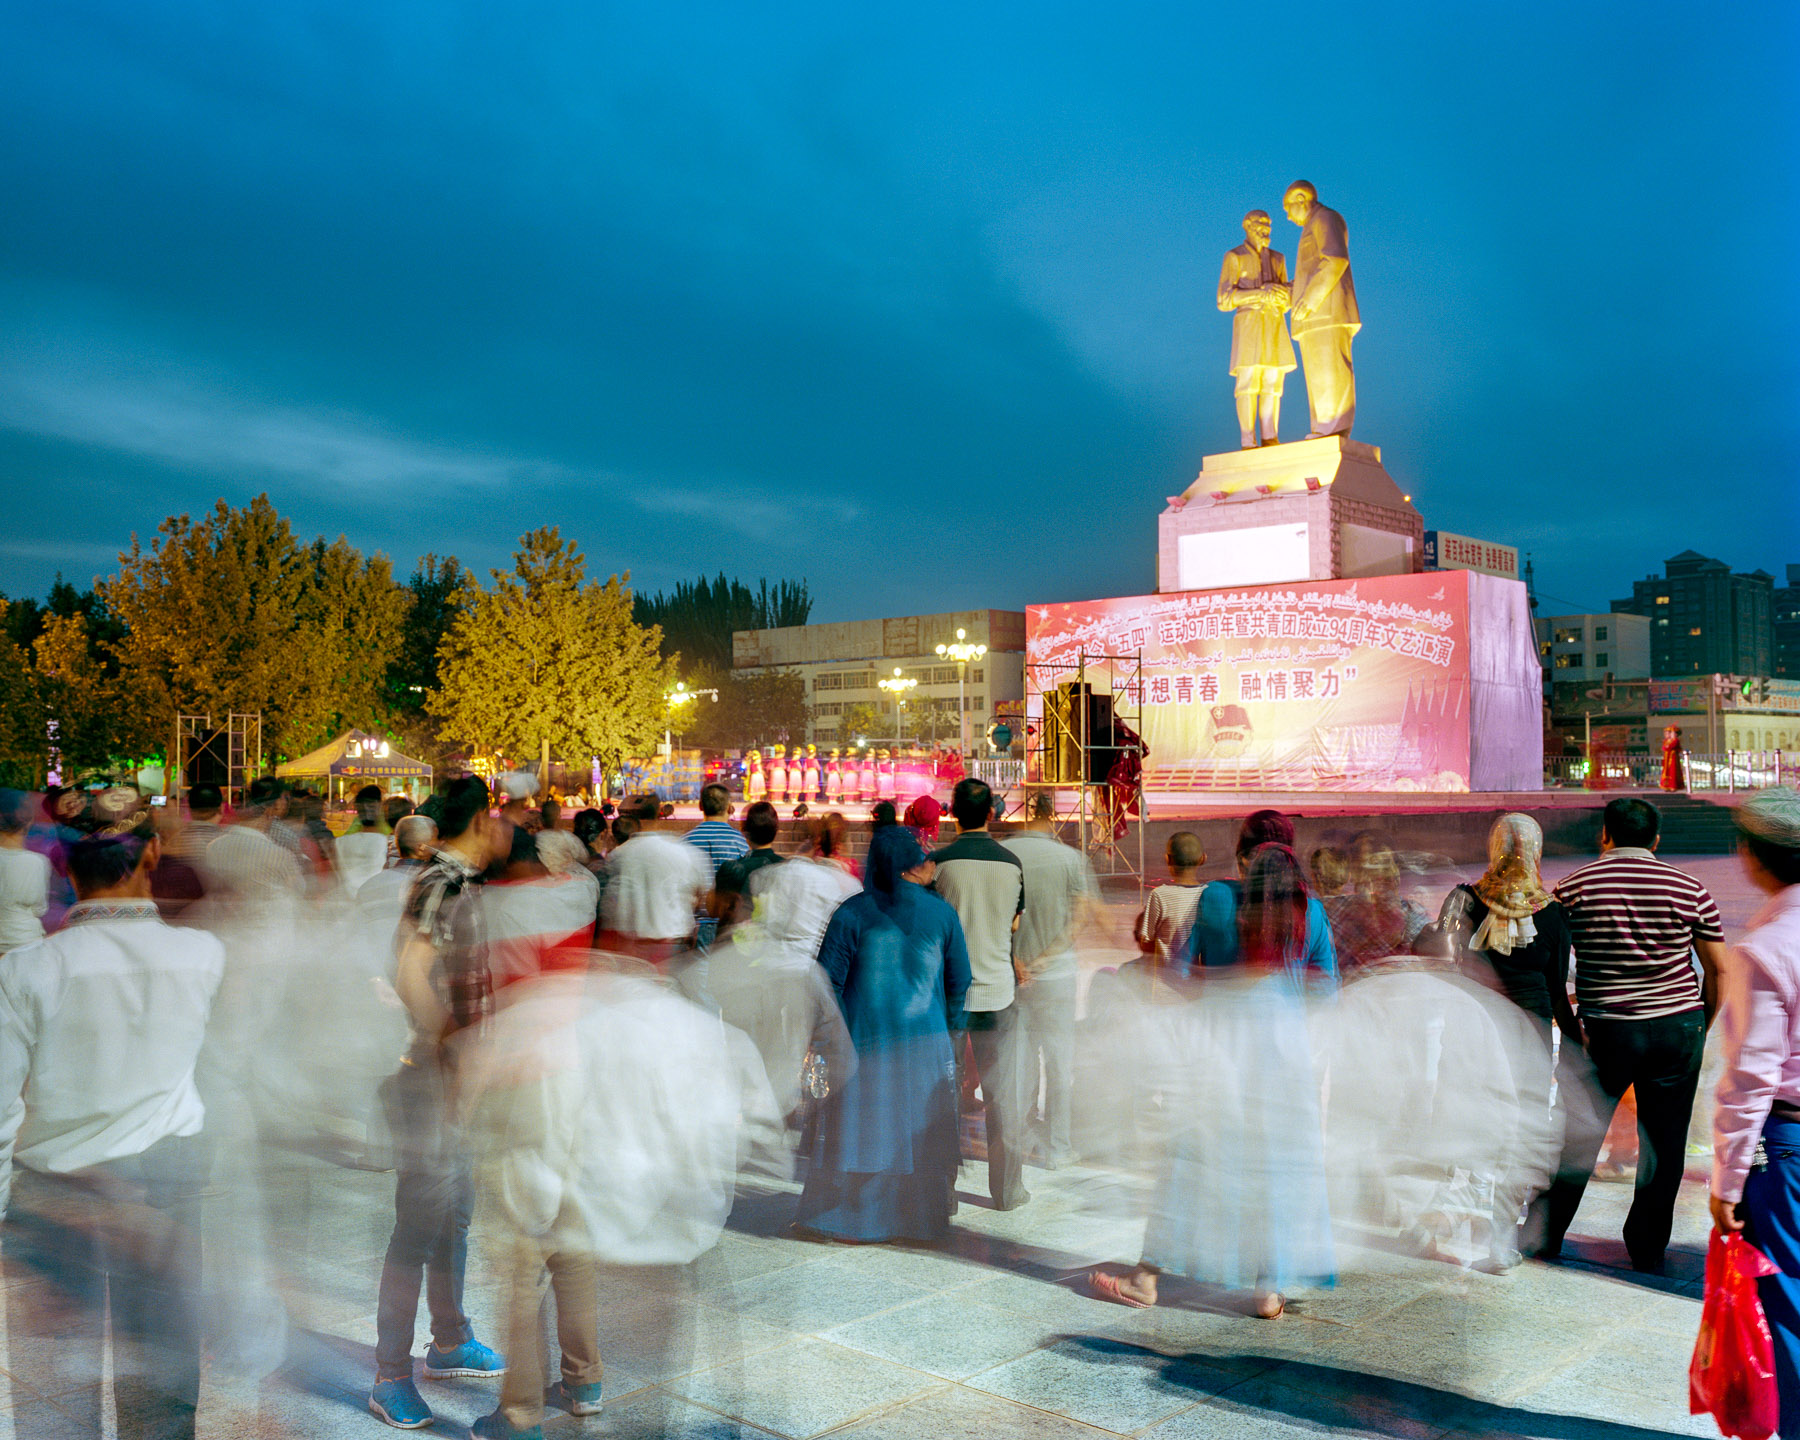  May 2016. Hotan, Xinjiang province, China. Tuanjie square which is Hotan's main square during a night event. In the center of the square stands the statue of Kurban Tulum's shaking hands with Mao Zedong.  